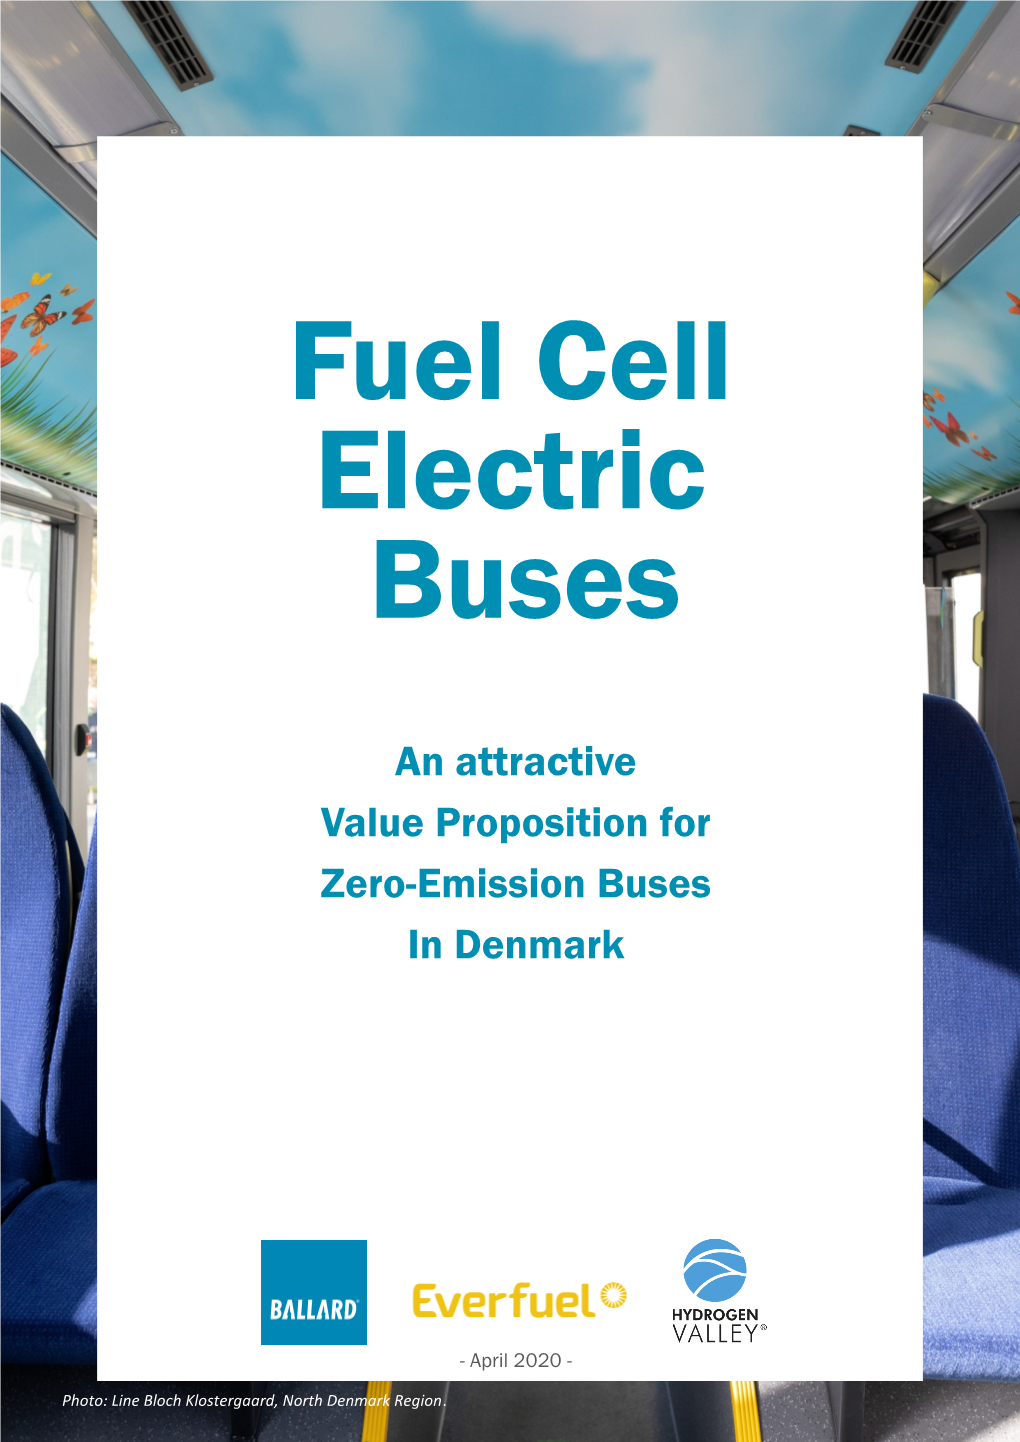 An Attractive Value Proposition for Zero-Emission Buses in Denmark